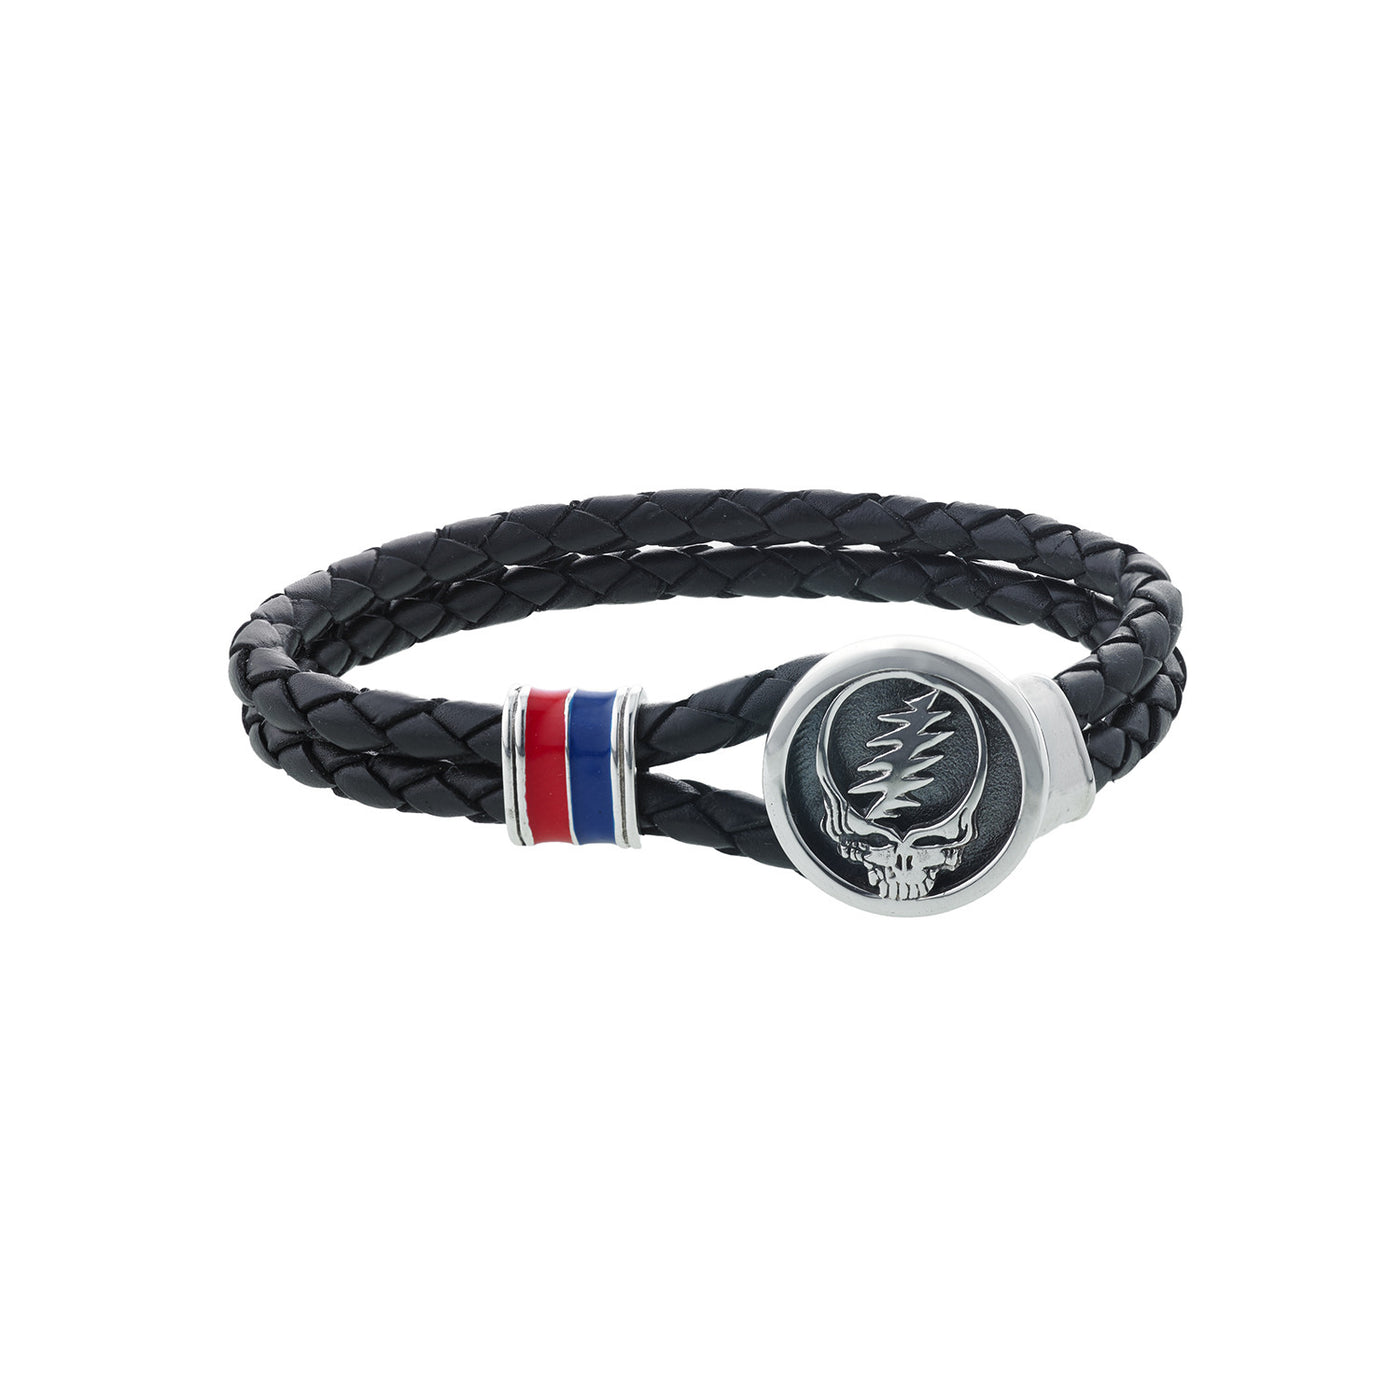 Steal Your Face Sterling Silver, Blue and Red Enamel & Leather Bracelet - Cynthia Gale New York - 2